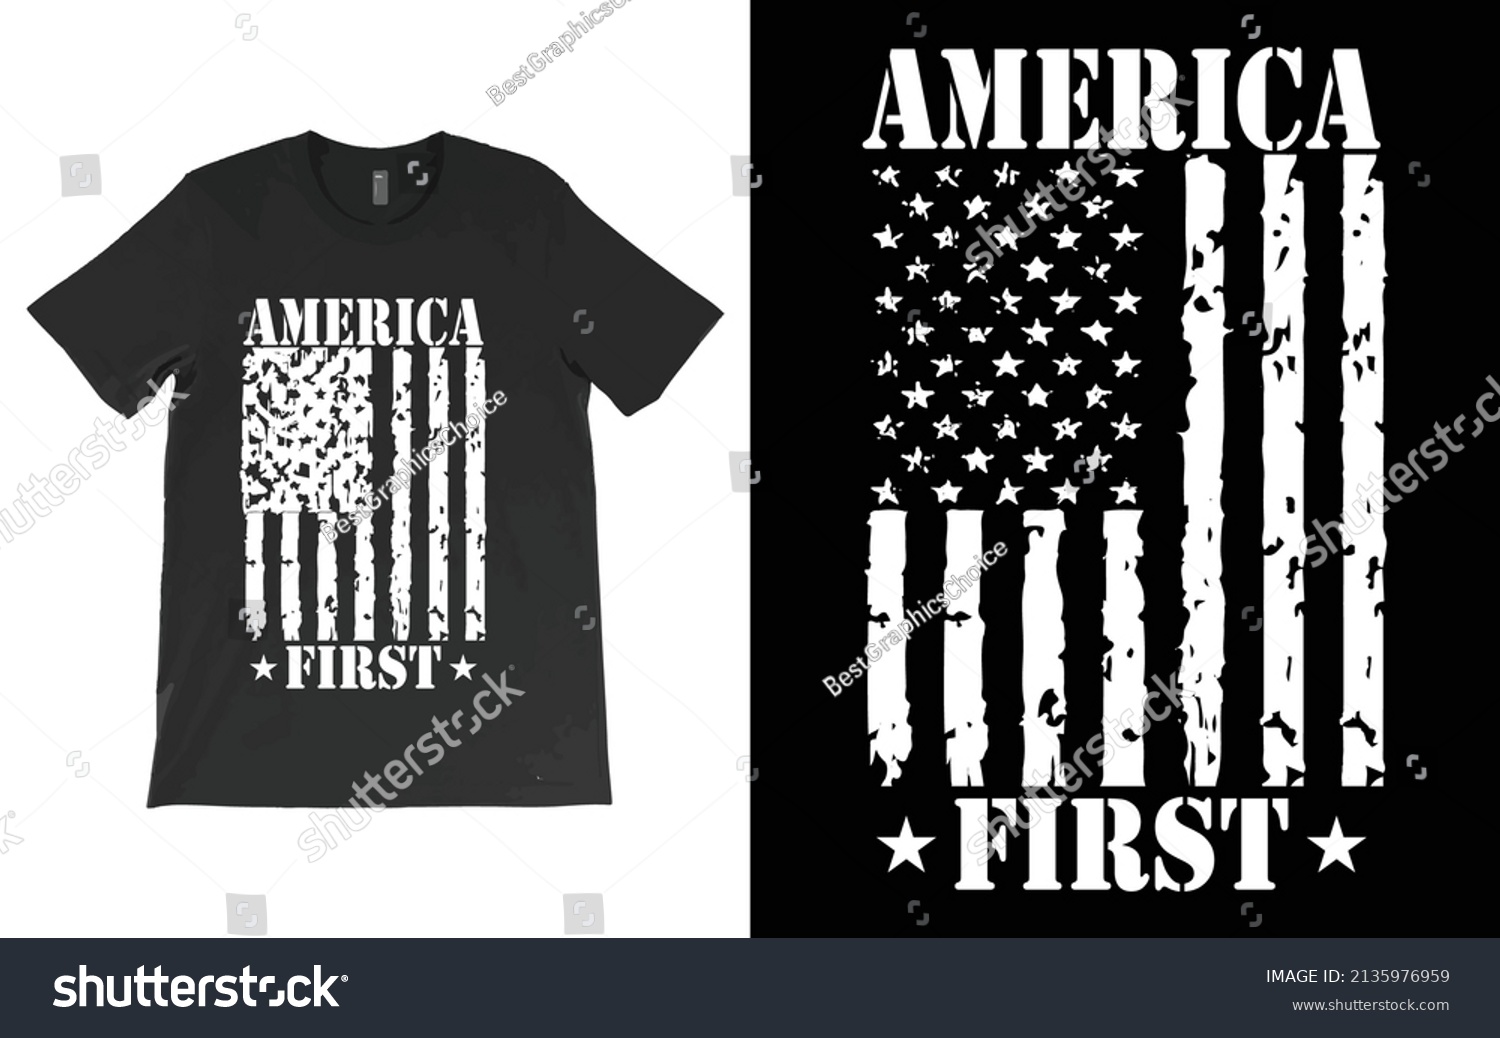 SVG of America First T-Shirt Vector, American Pride, Patriot Party Tee, Keep America Great, Gift for Military, 1777, USA. svg